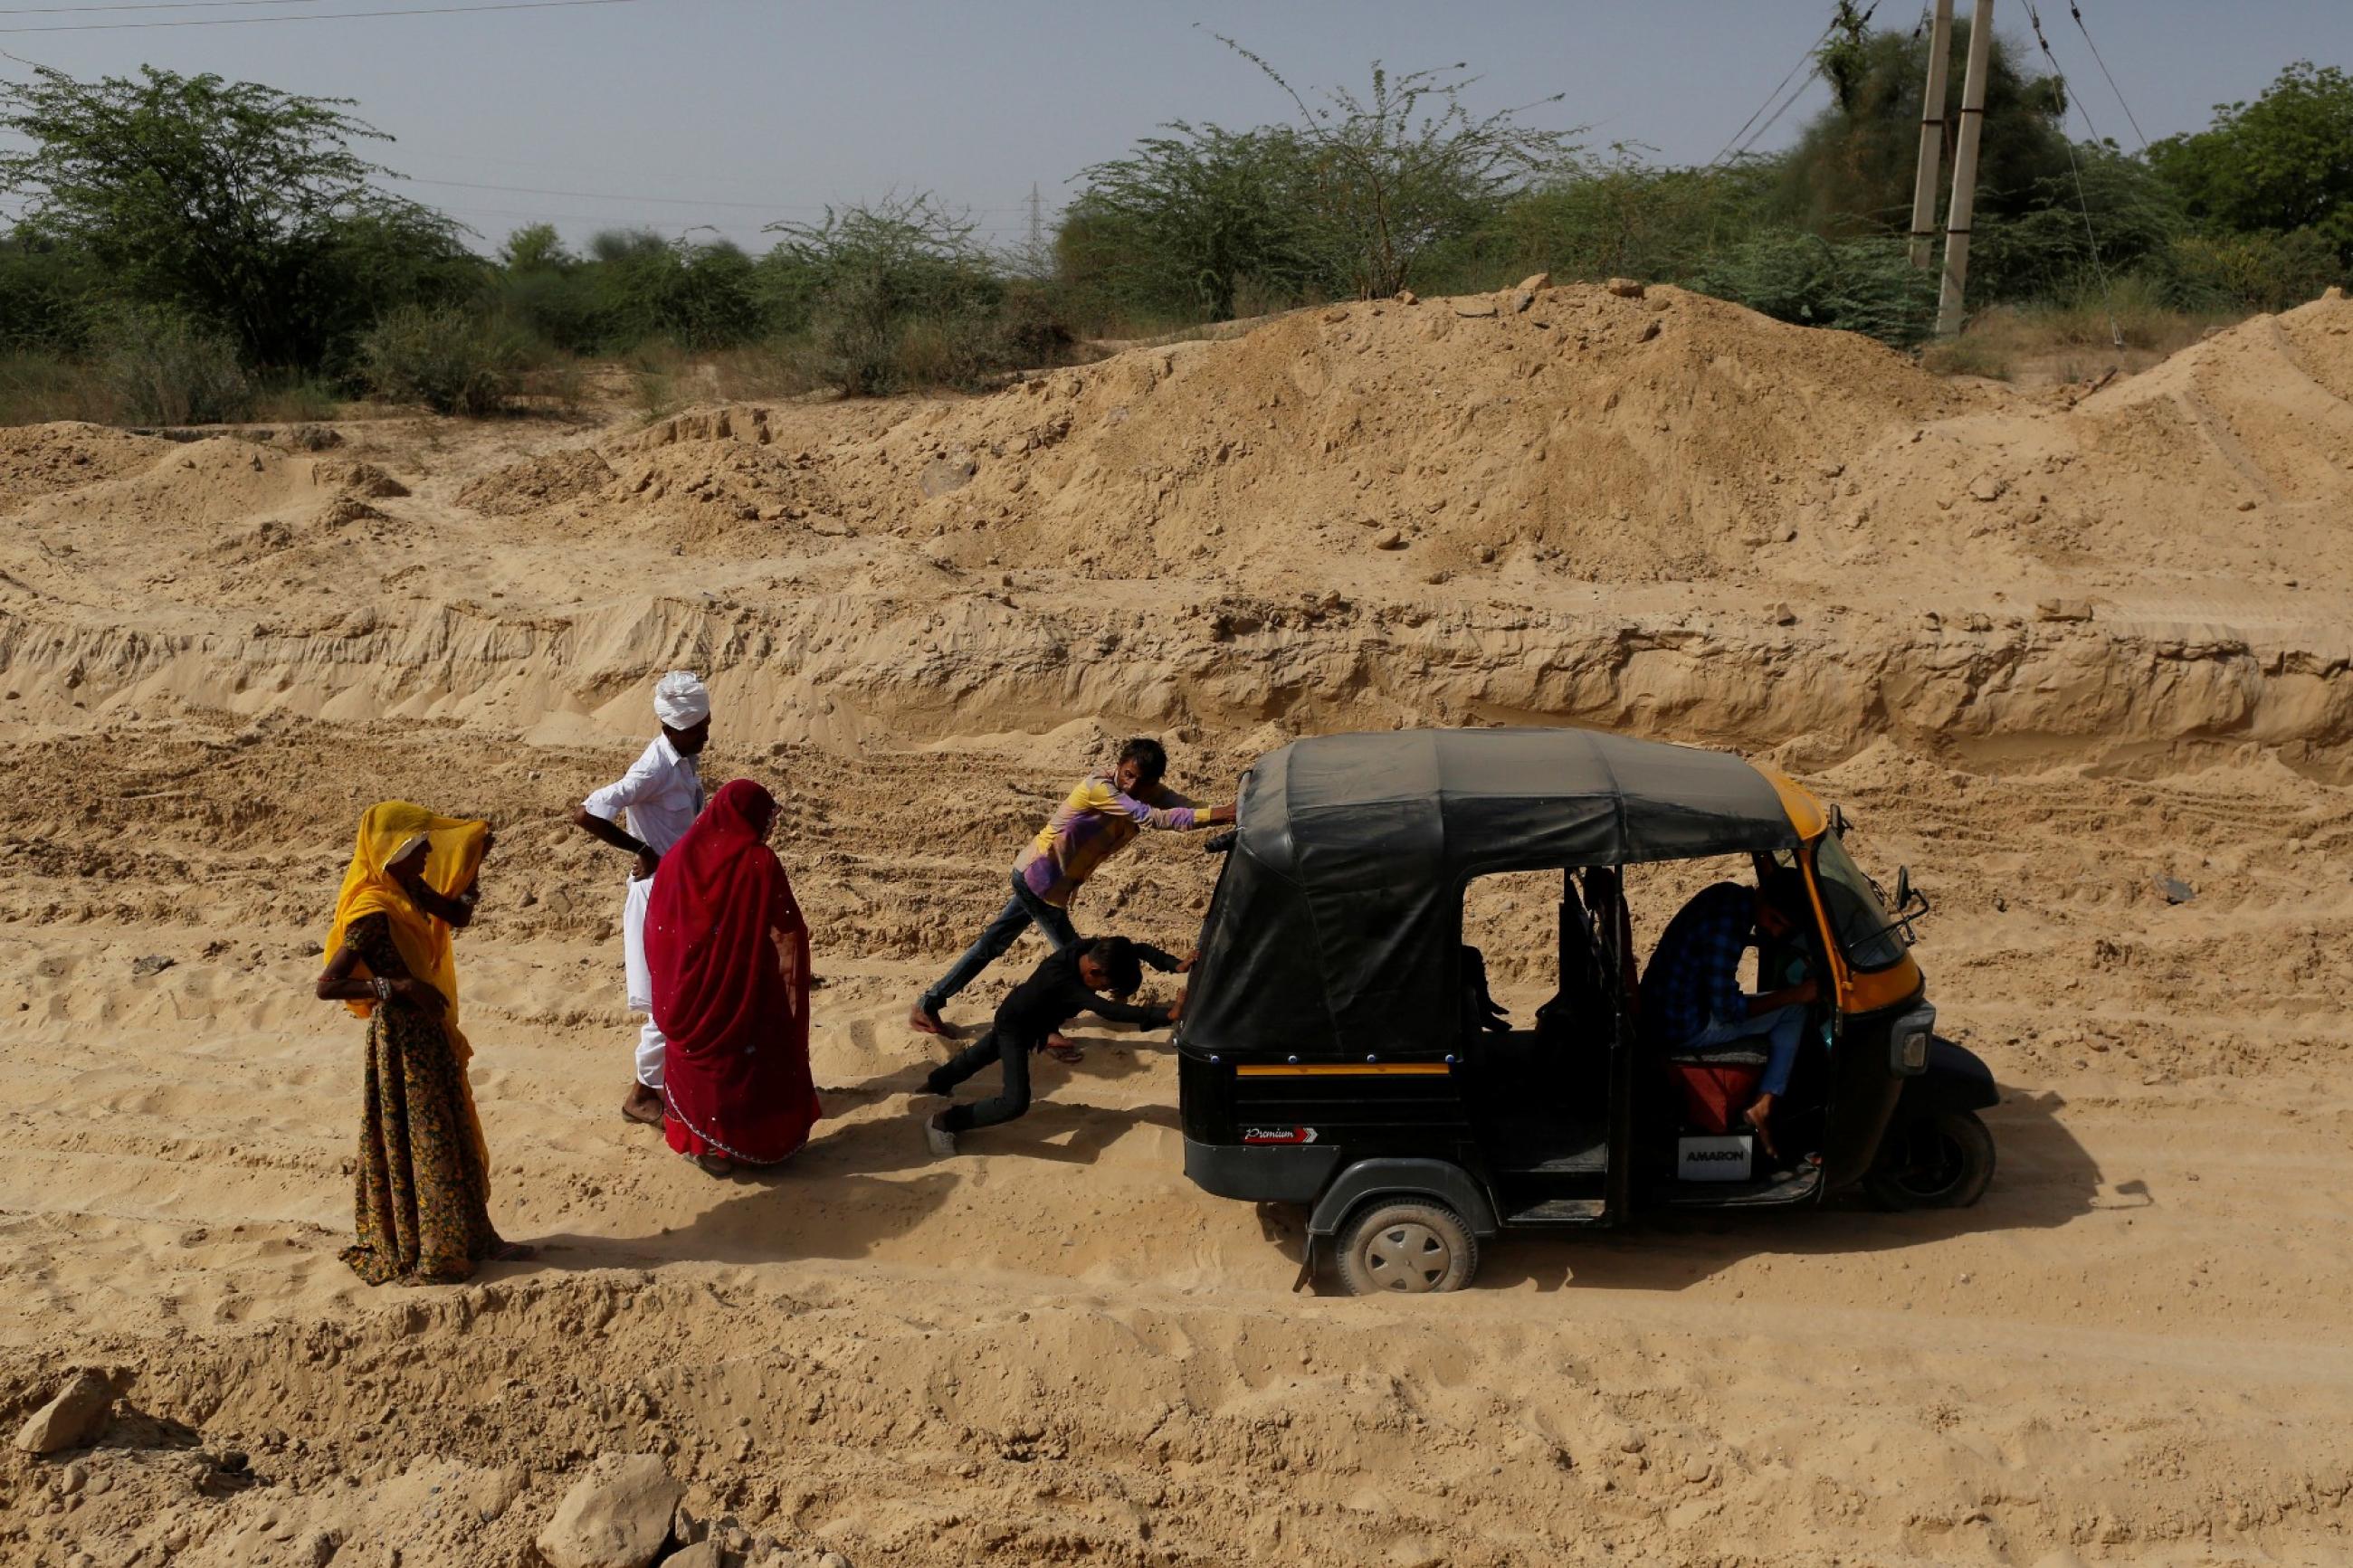 Bhawri Devi watches as her husband and son push an auto-rickshaw which got stuck in the sand on the way home from receiving cancer treatment, in a village in Jalore, India, on April 7, 2018. 